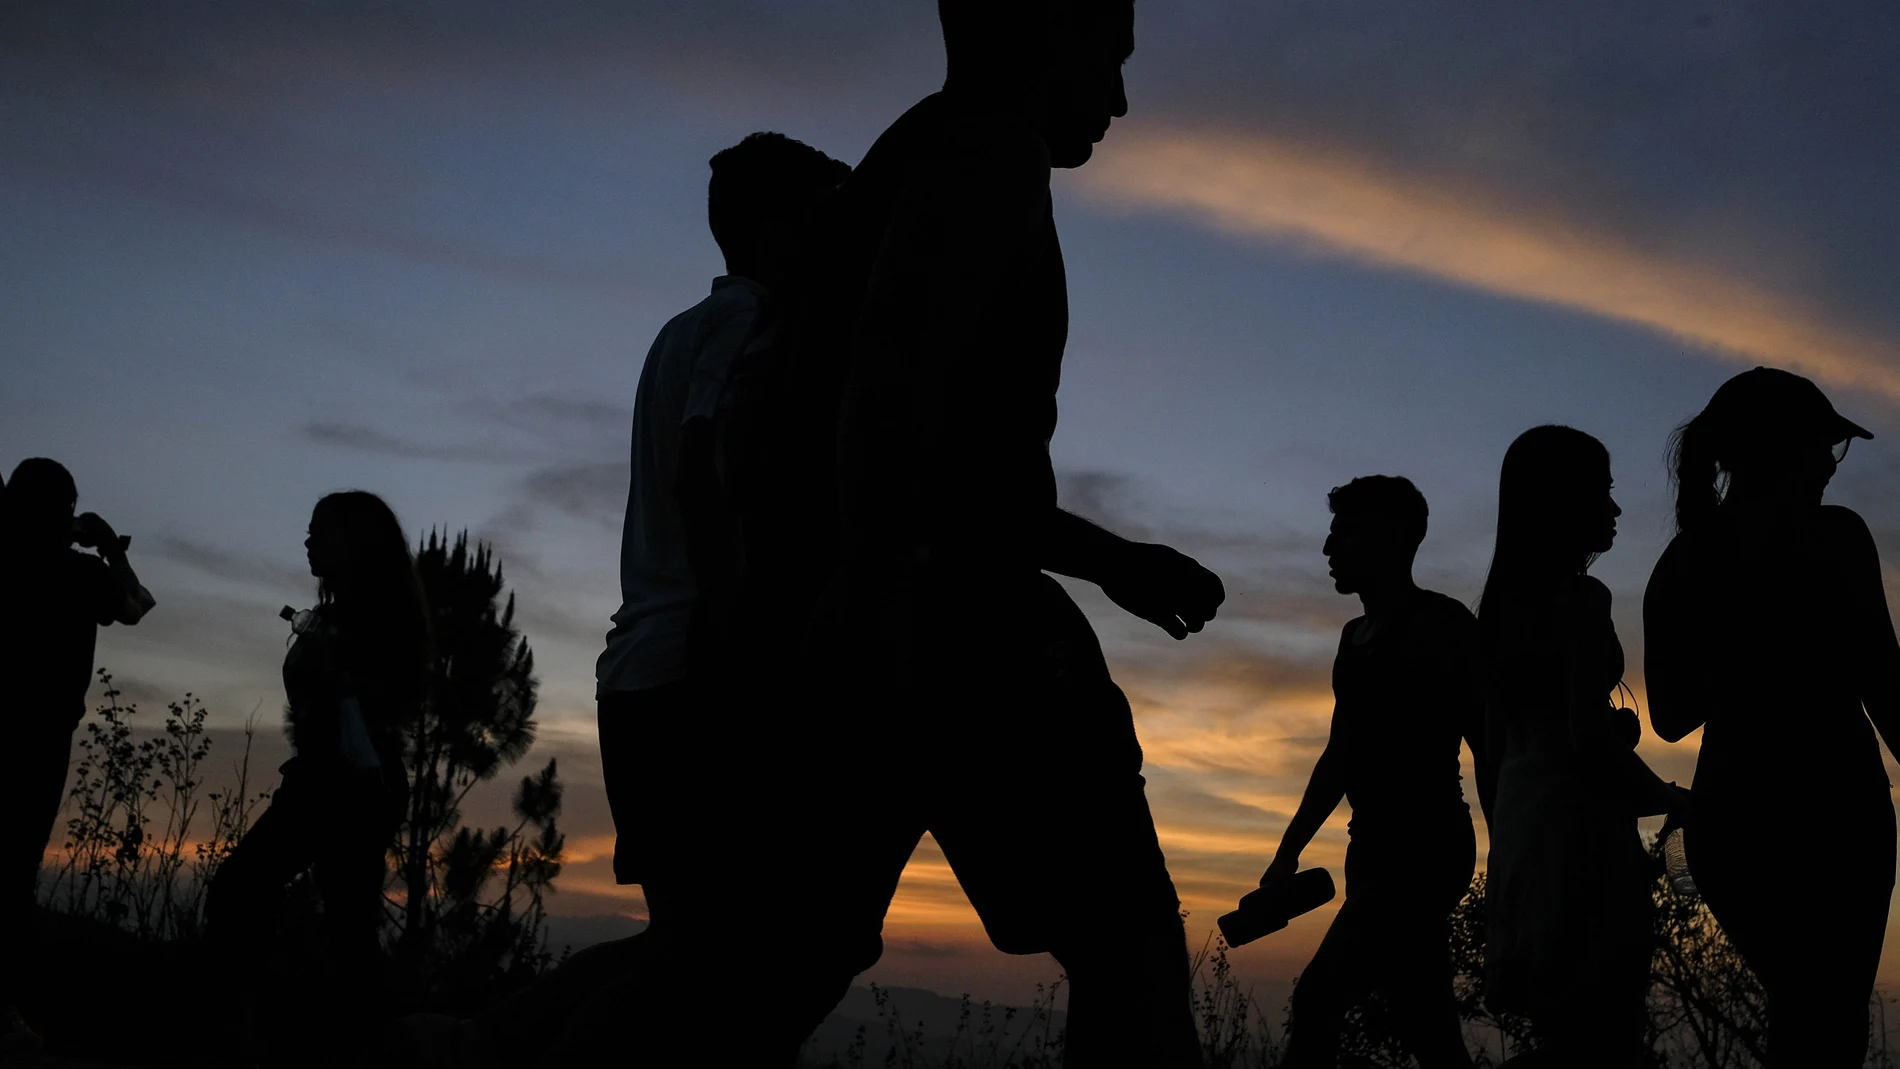 People are silhouetted as they walk along the El VolcÃ¡n hill during sunset in the El Hatillo neighborhood of Caracas, Venezuela, Sunday, April 25, 2021. (AP Photo/Matias Delacroix)